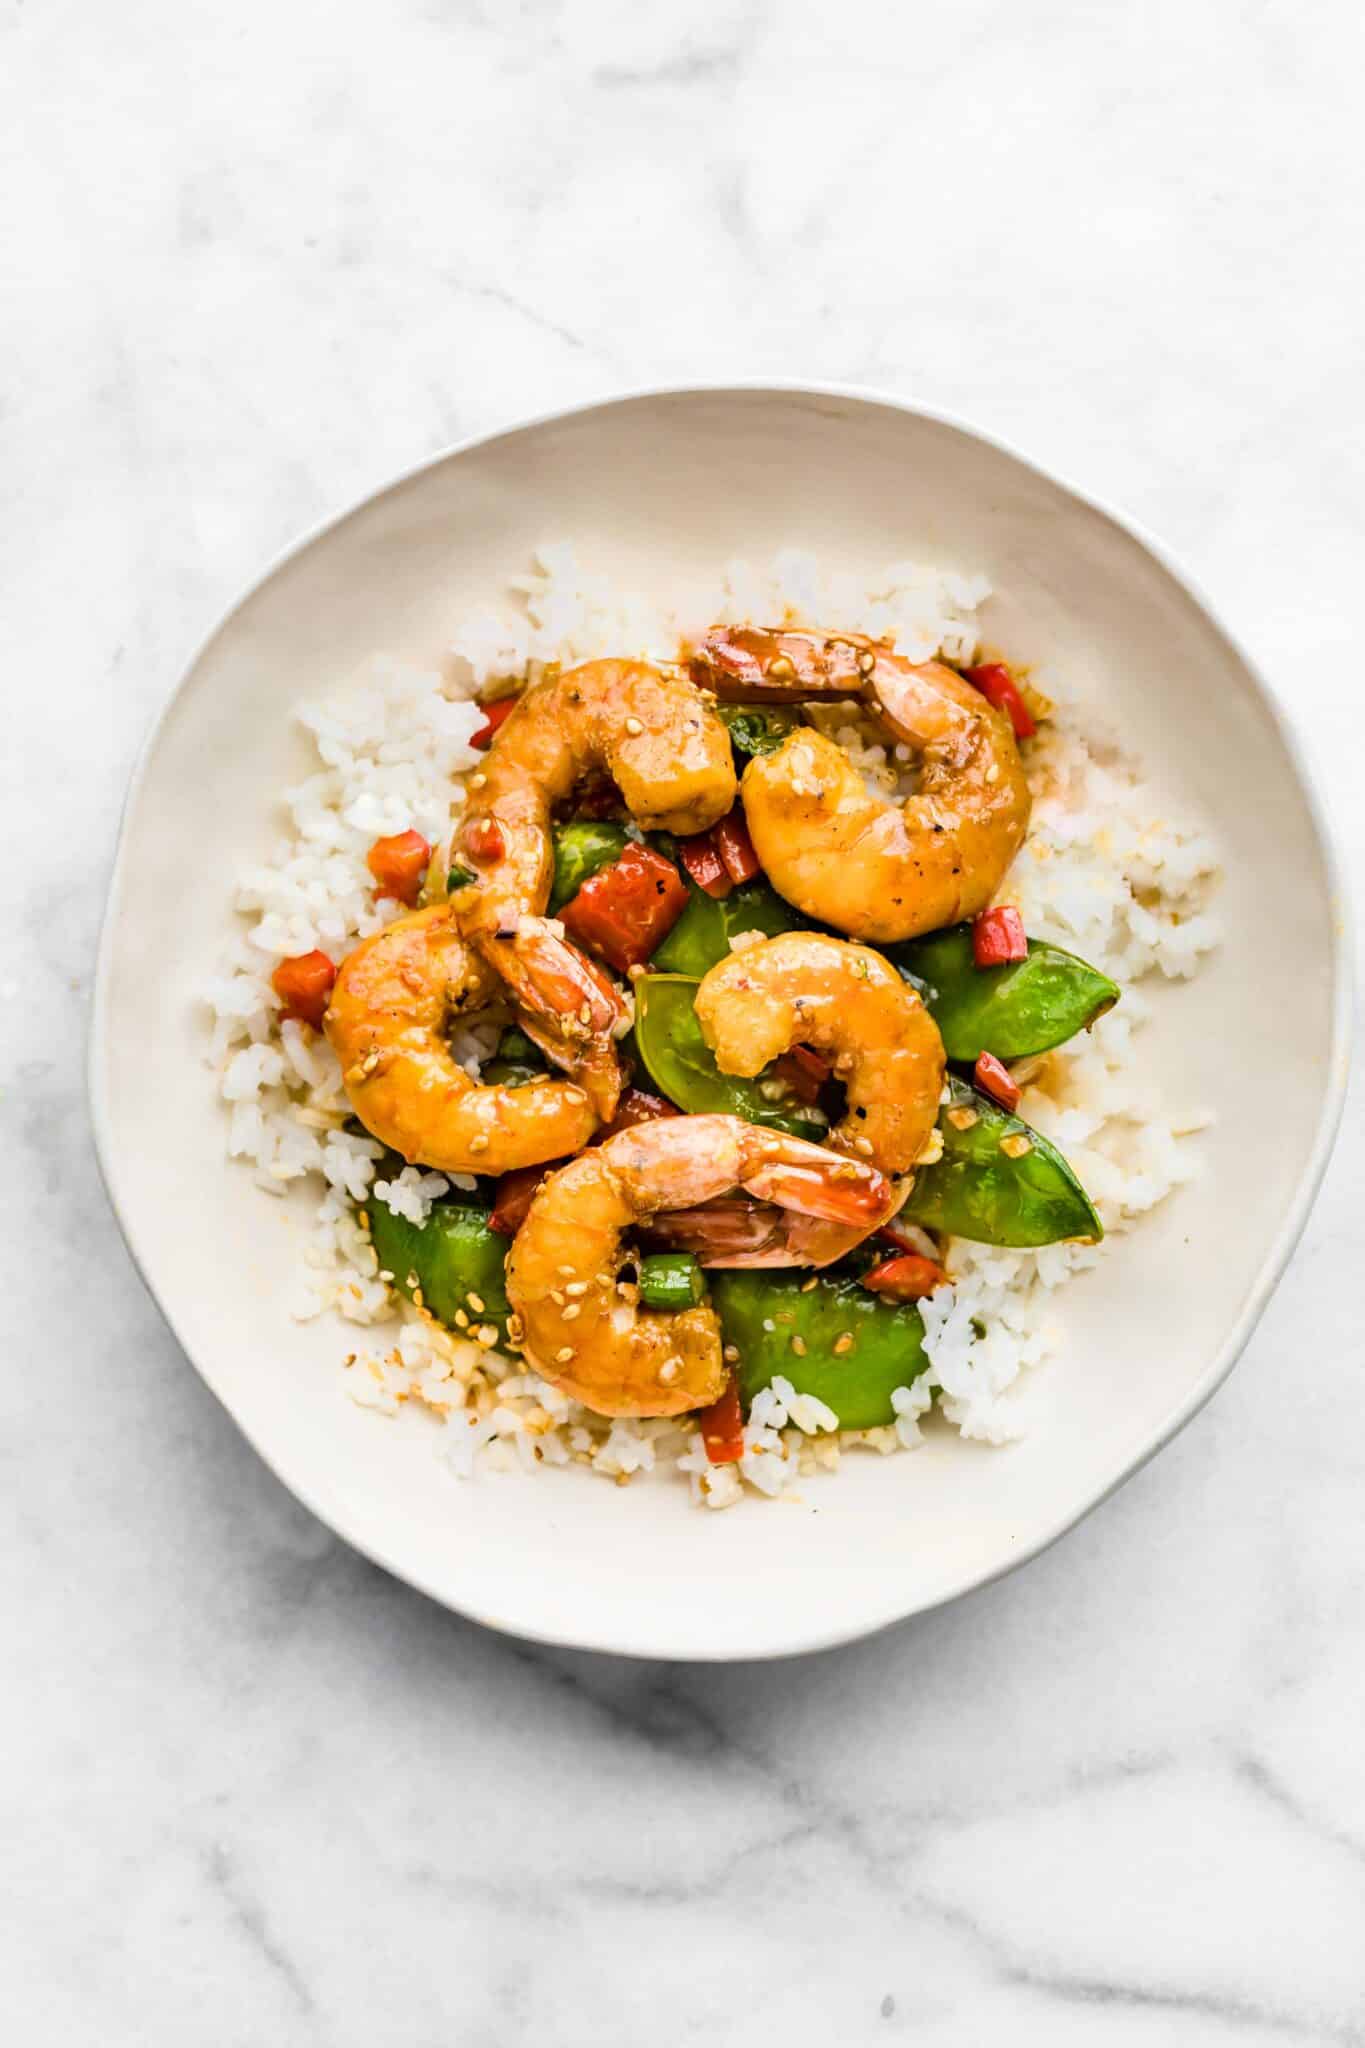 Overhead photo of plated orange shrimp stir fry on a bed of rice.